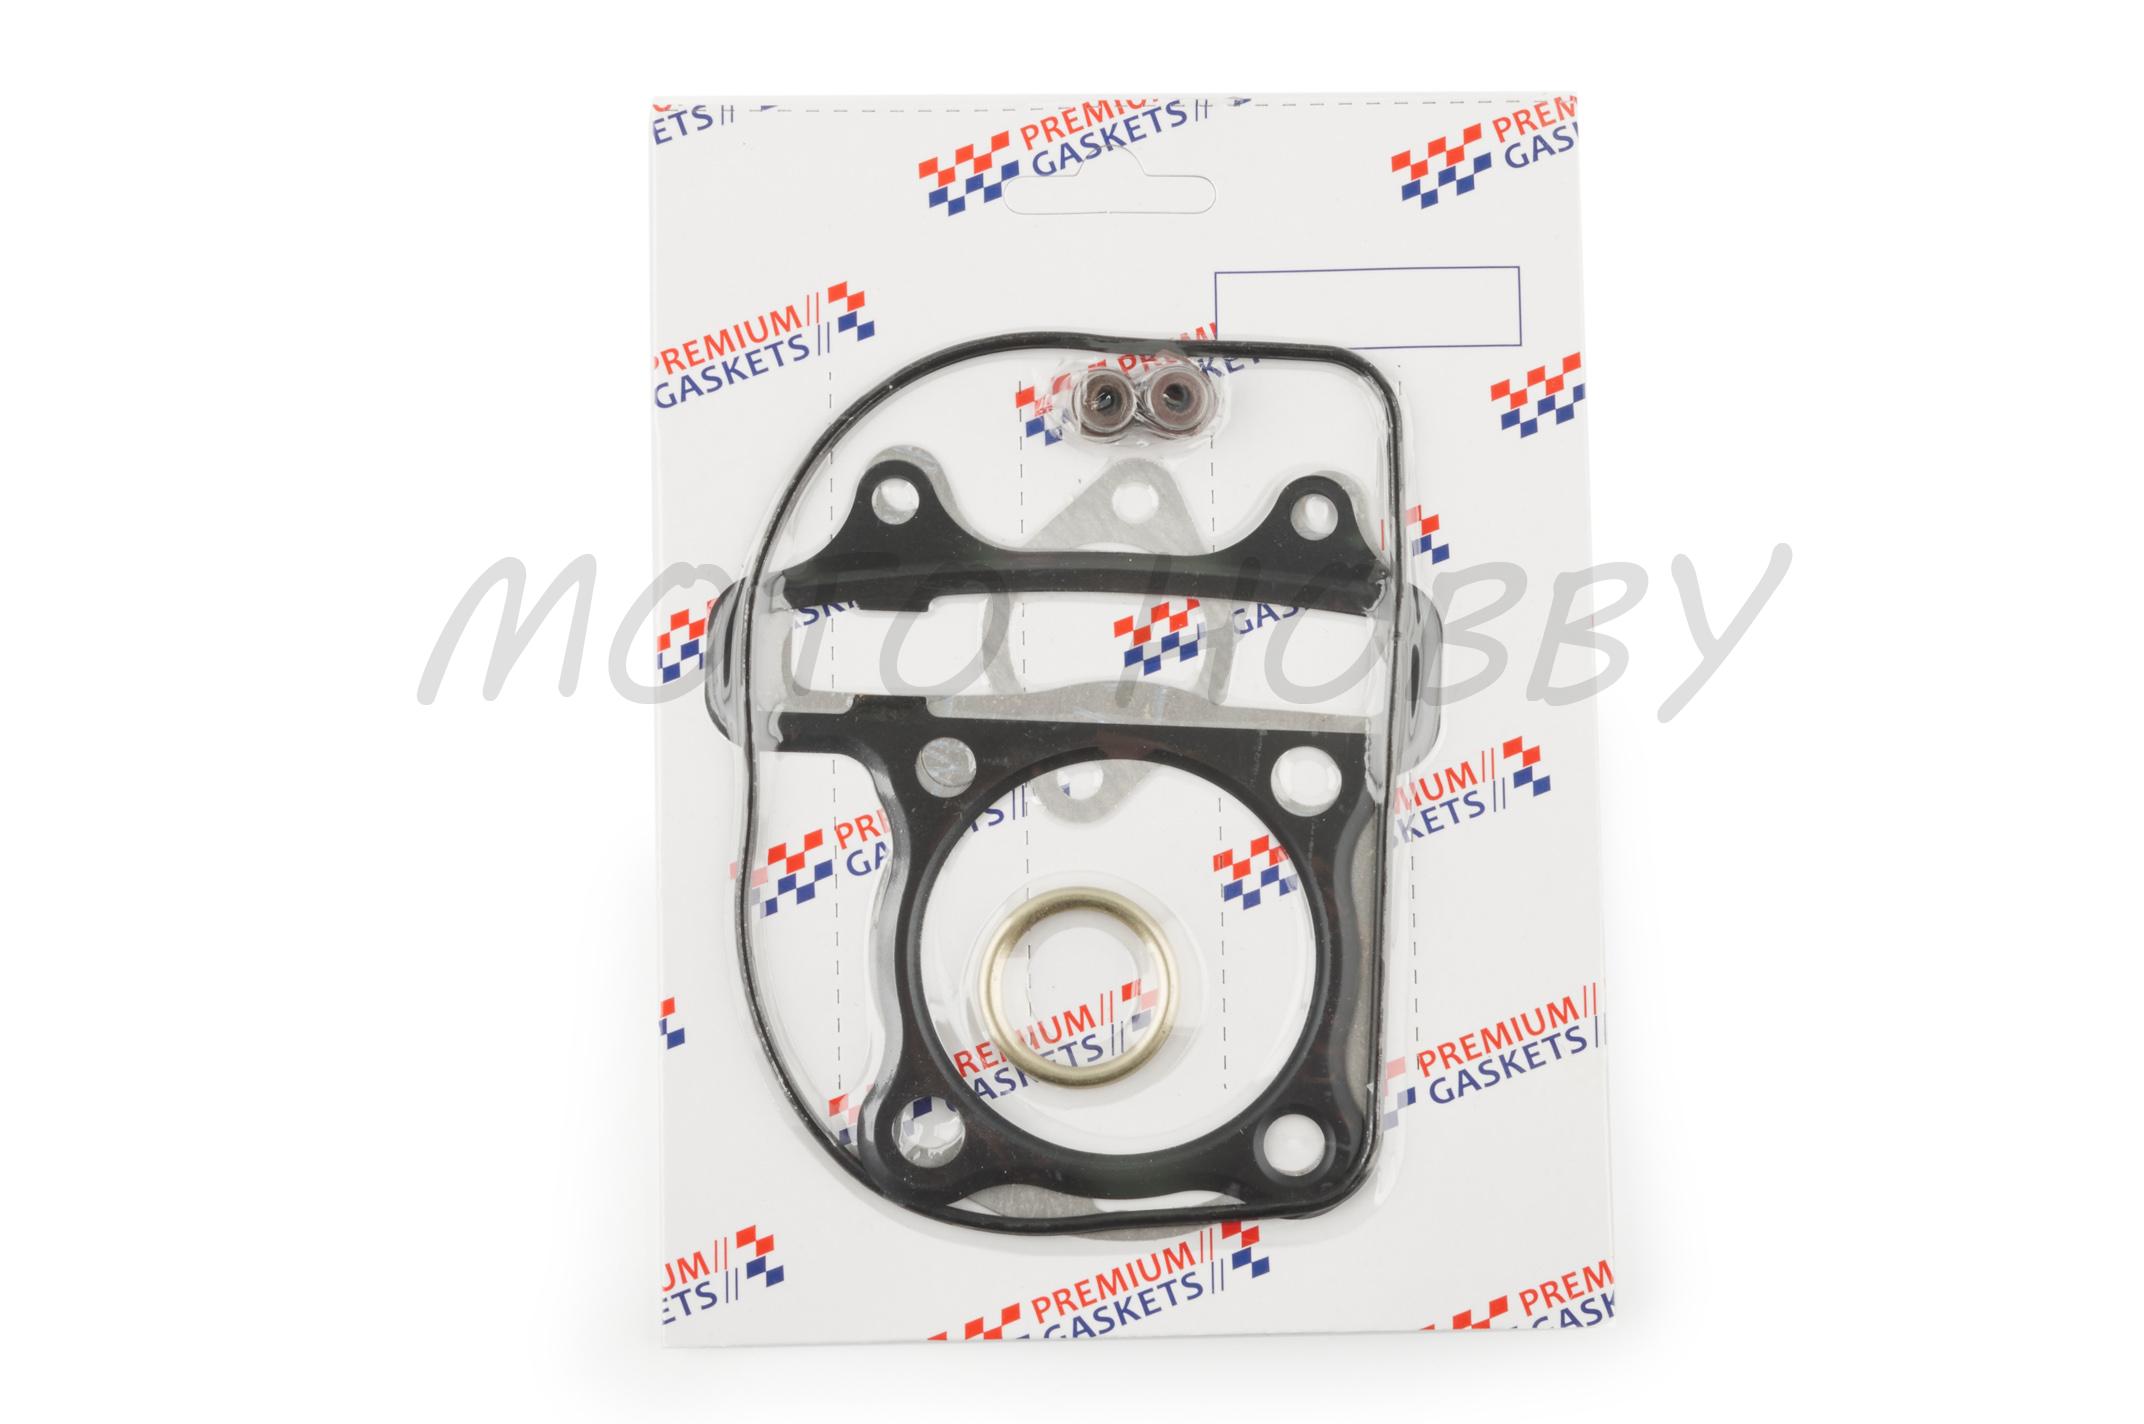   ()   4T 157QMJ, GY6 150   ?57,40mm   (mod C)   MAX GASKETS P-1959